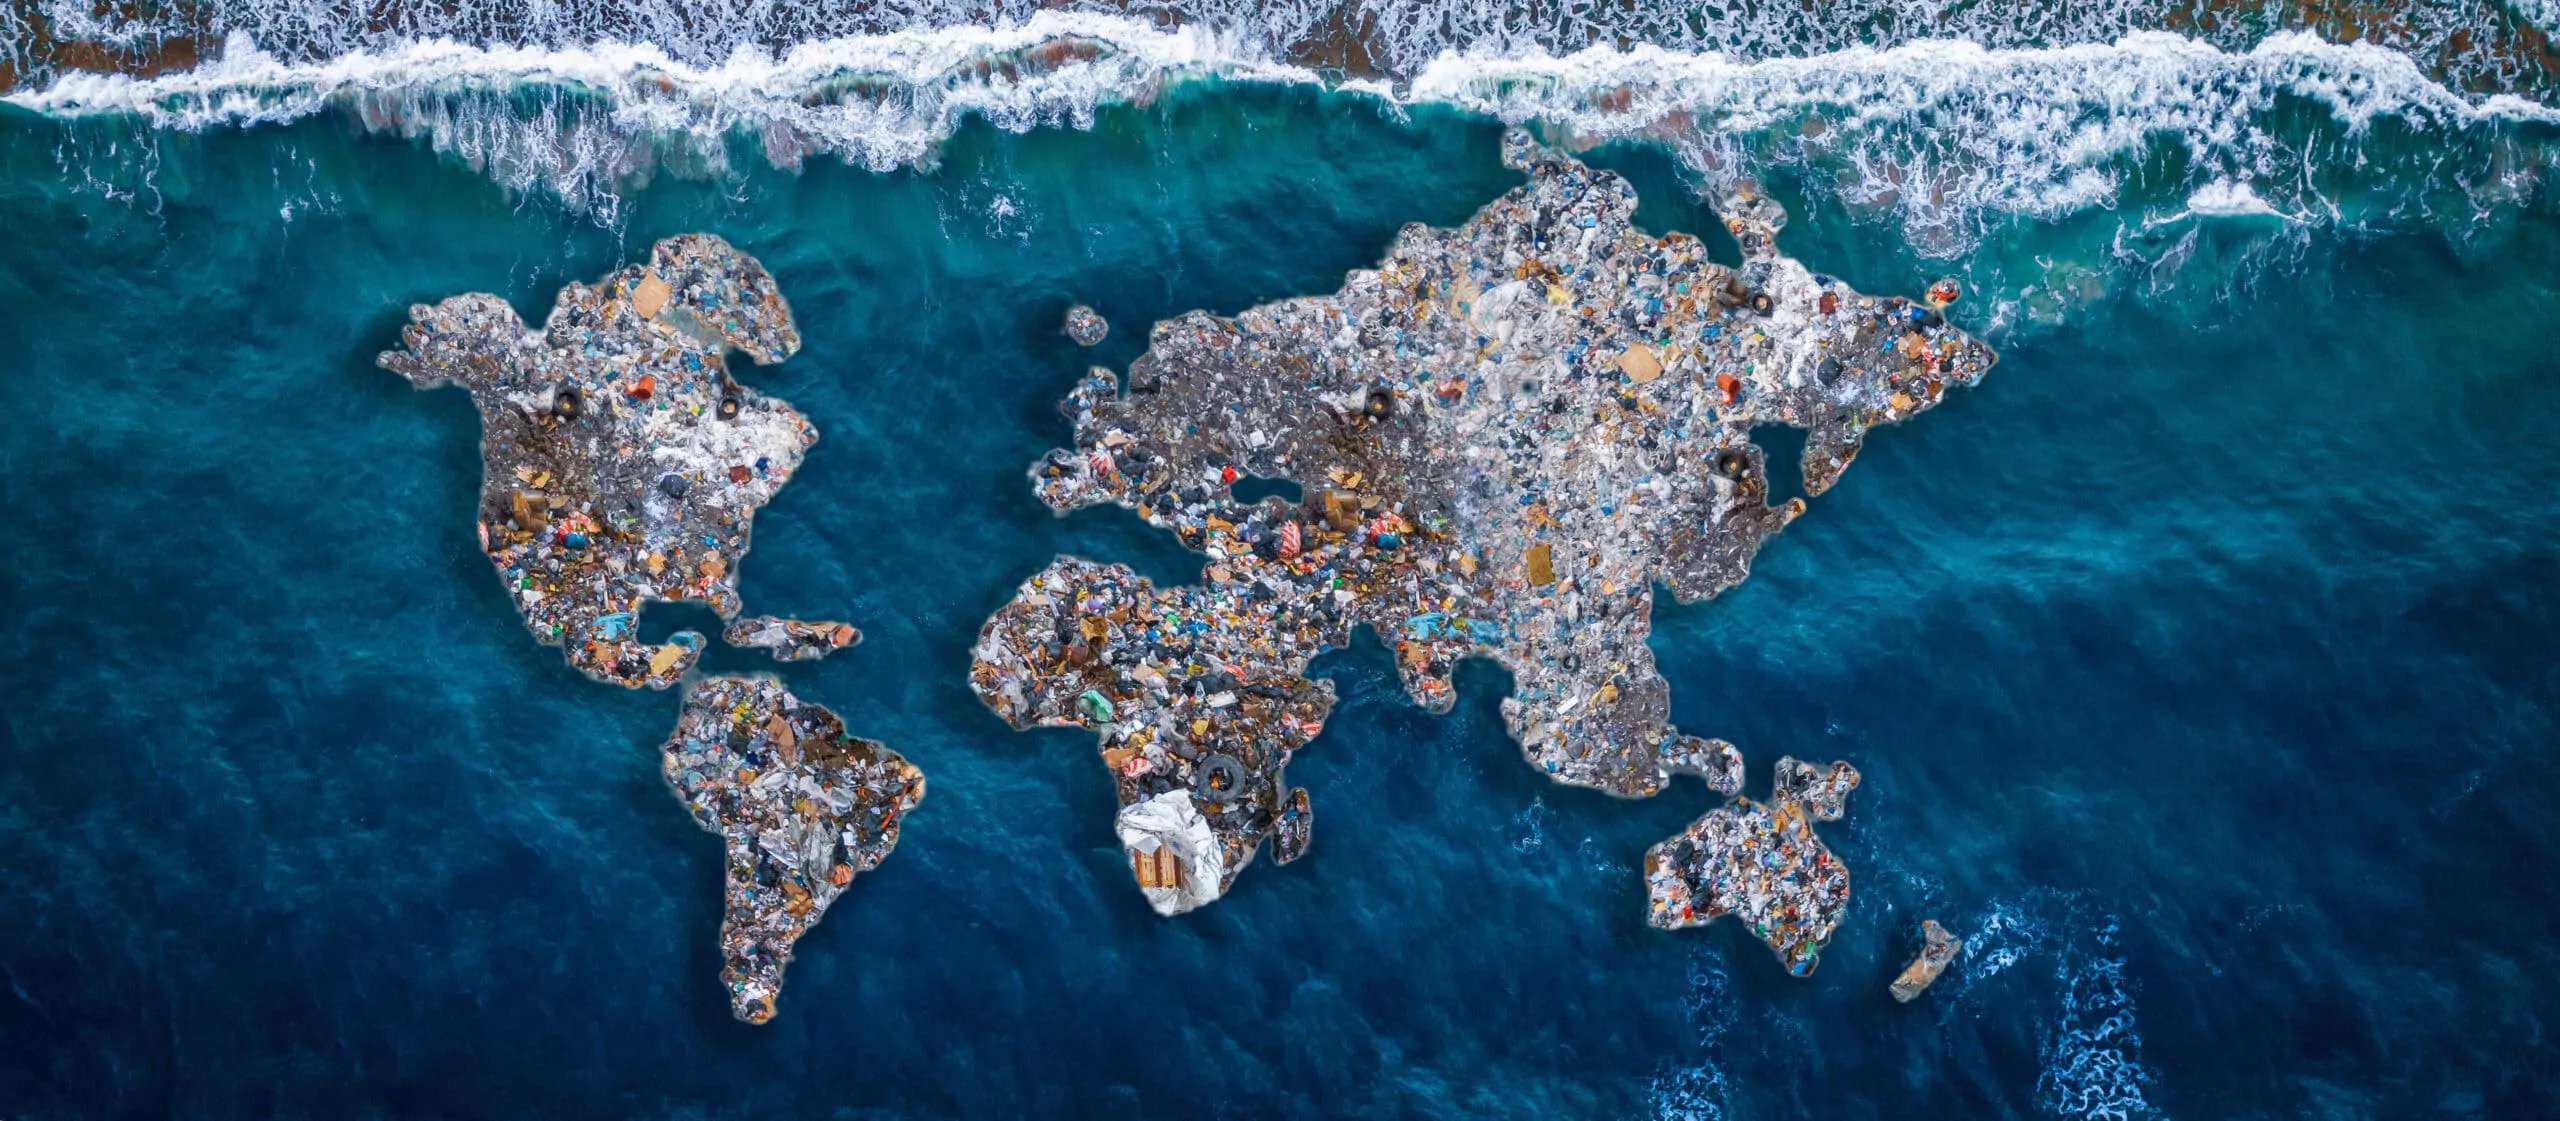 Concept environmental with plastic pollution ocean and human waste. Continents earth are made up of garbage, surrounded by water